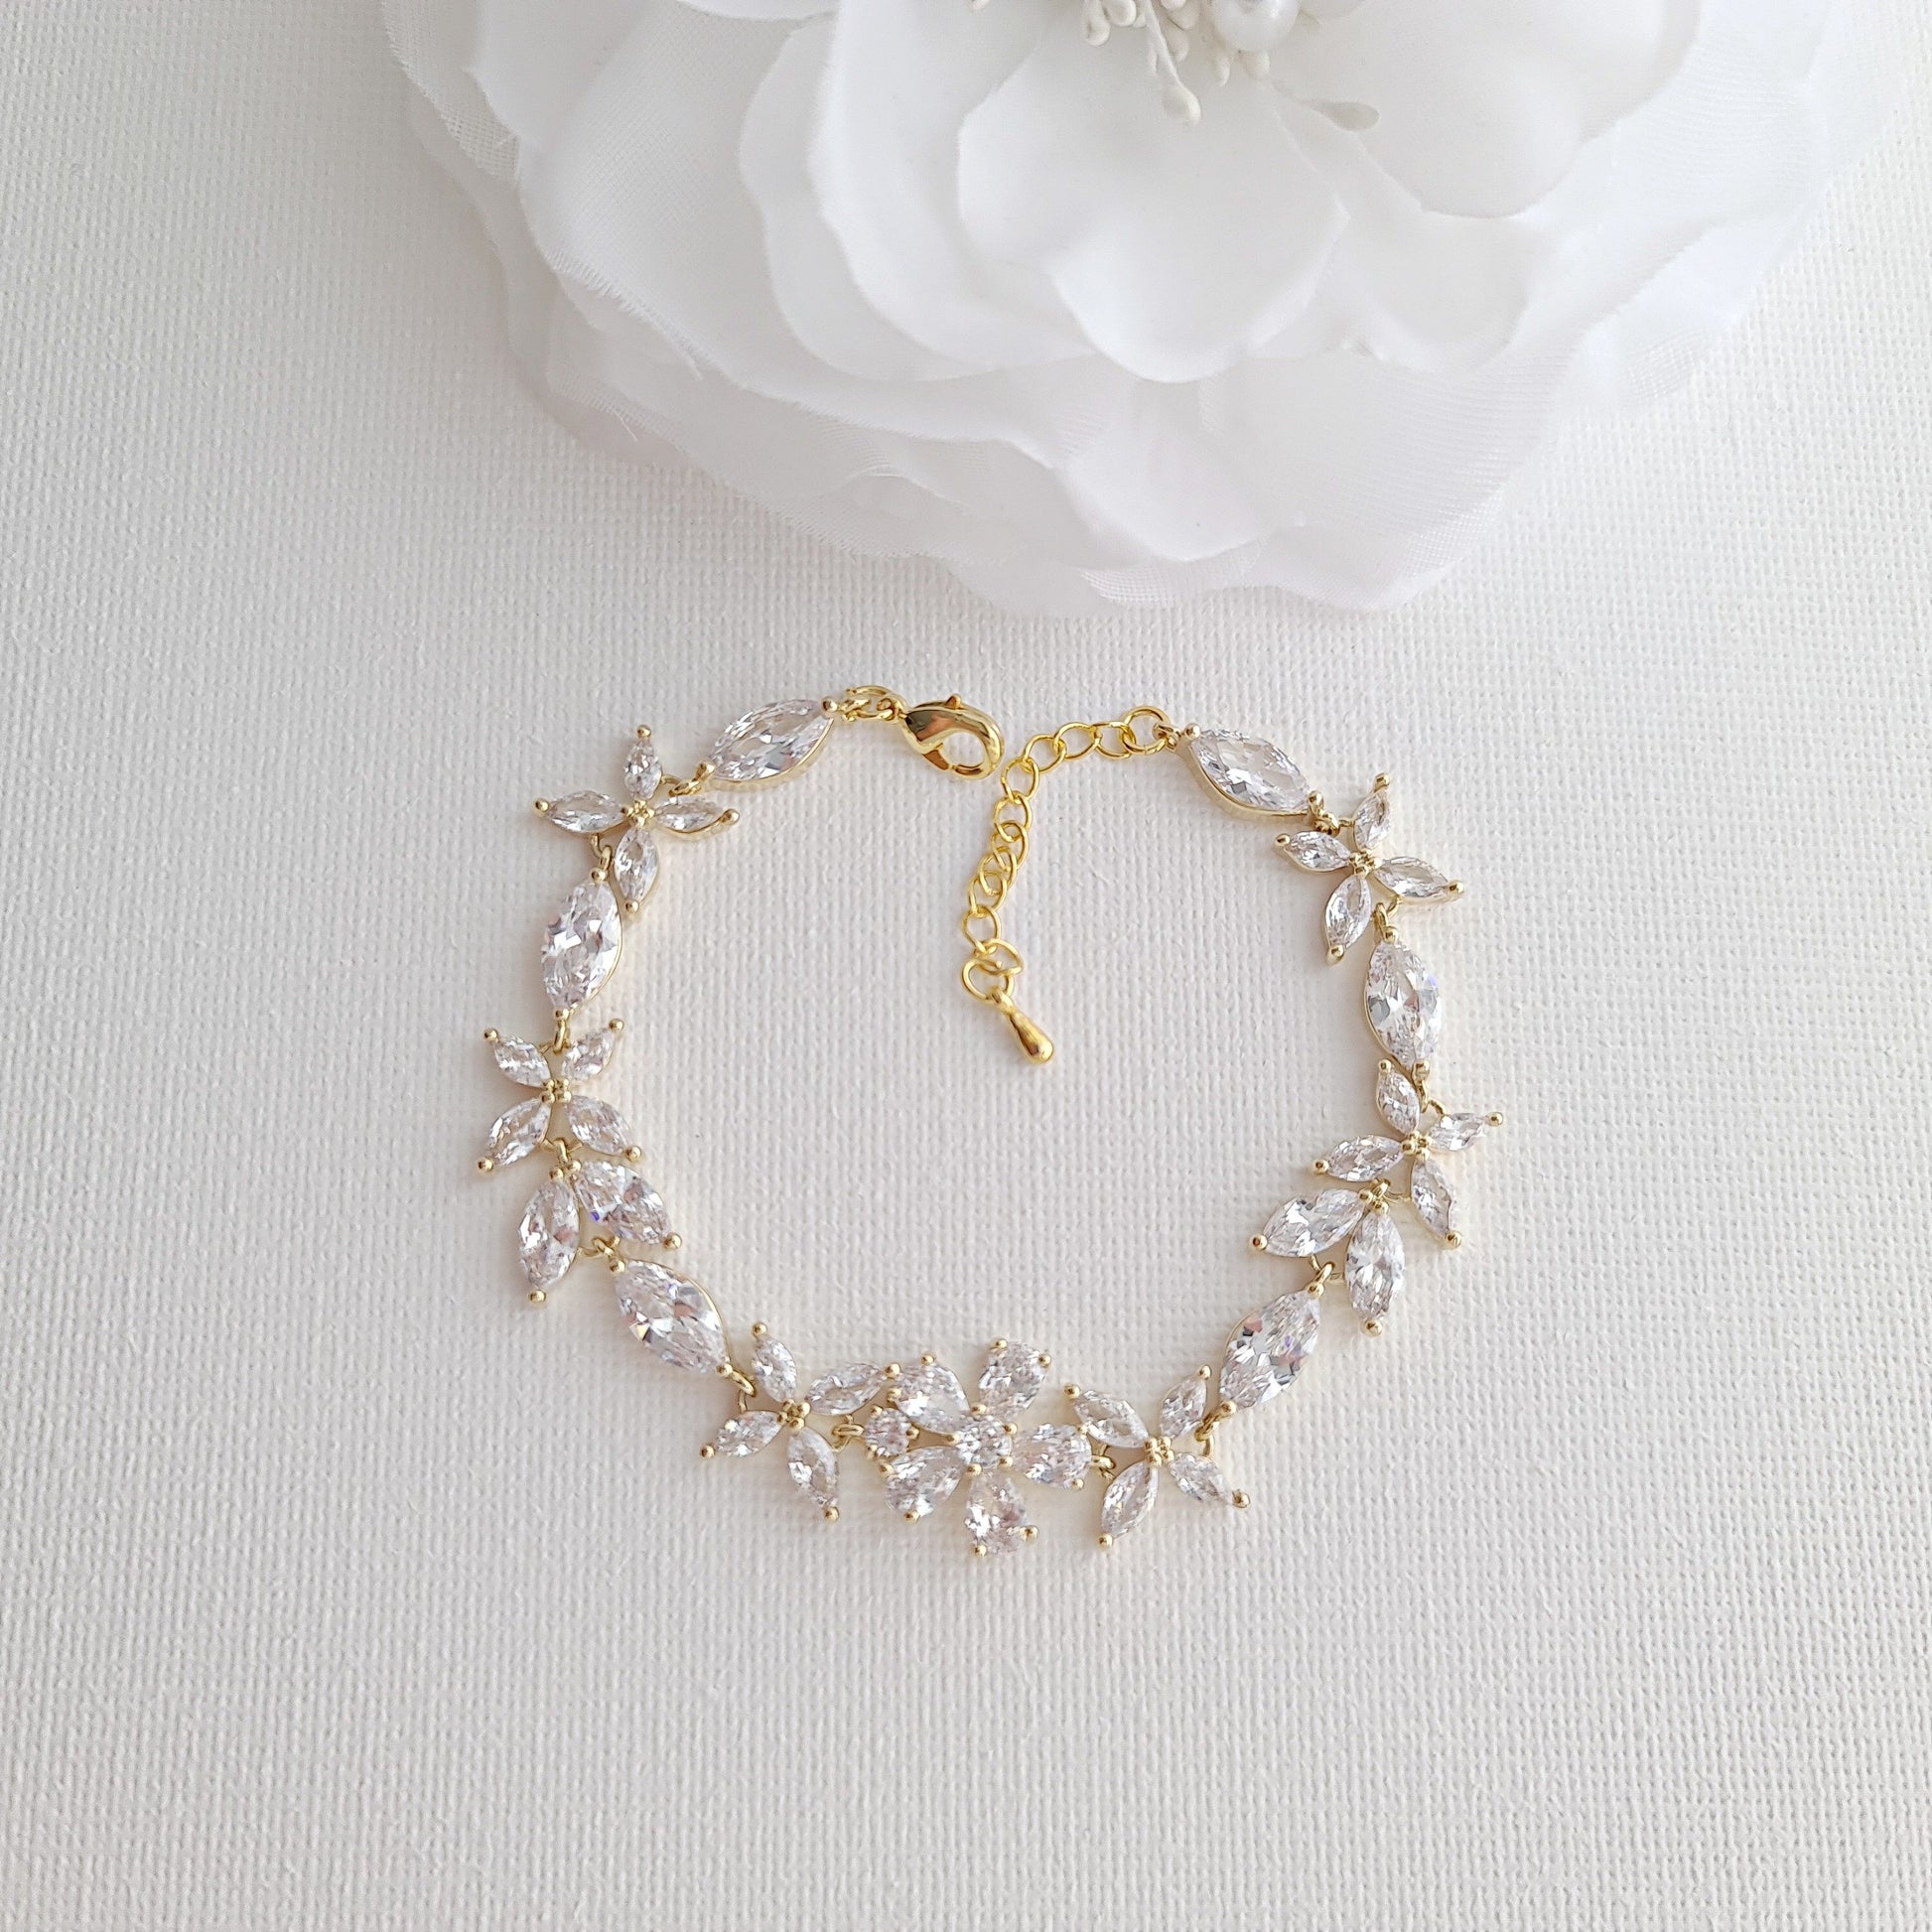 Gold Bridal Jewelry Set Earrings Necklace Bracelet Hair Comb-Daisy - PoetryDesigns